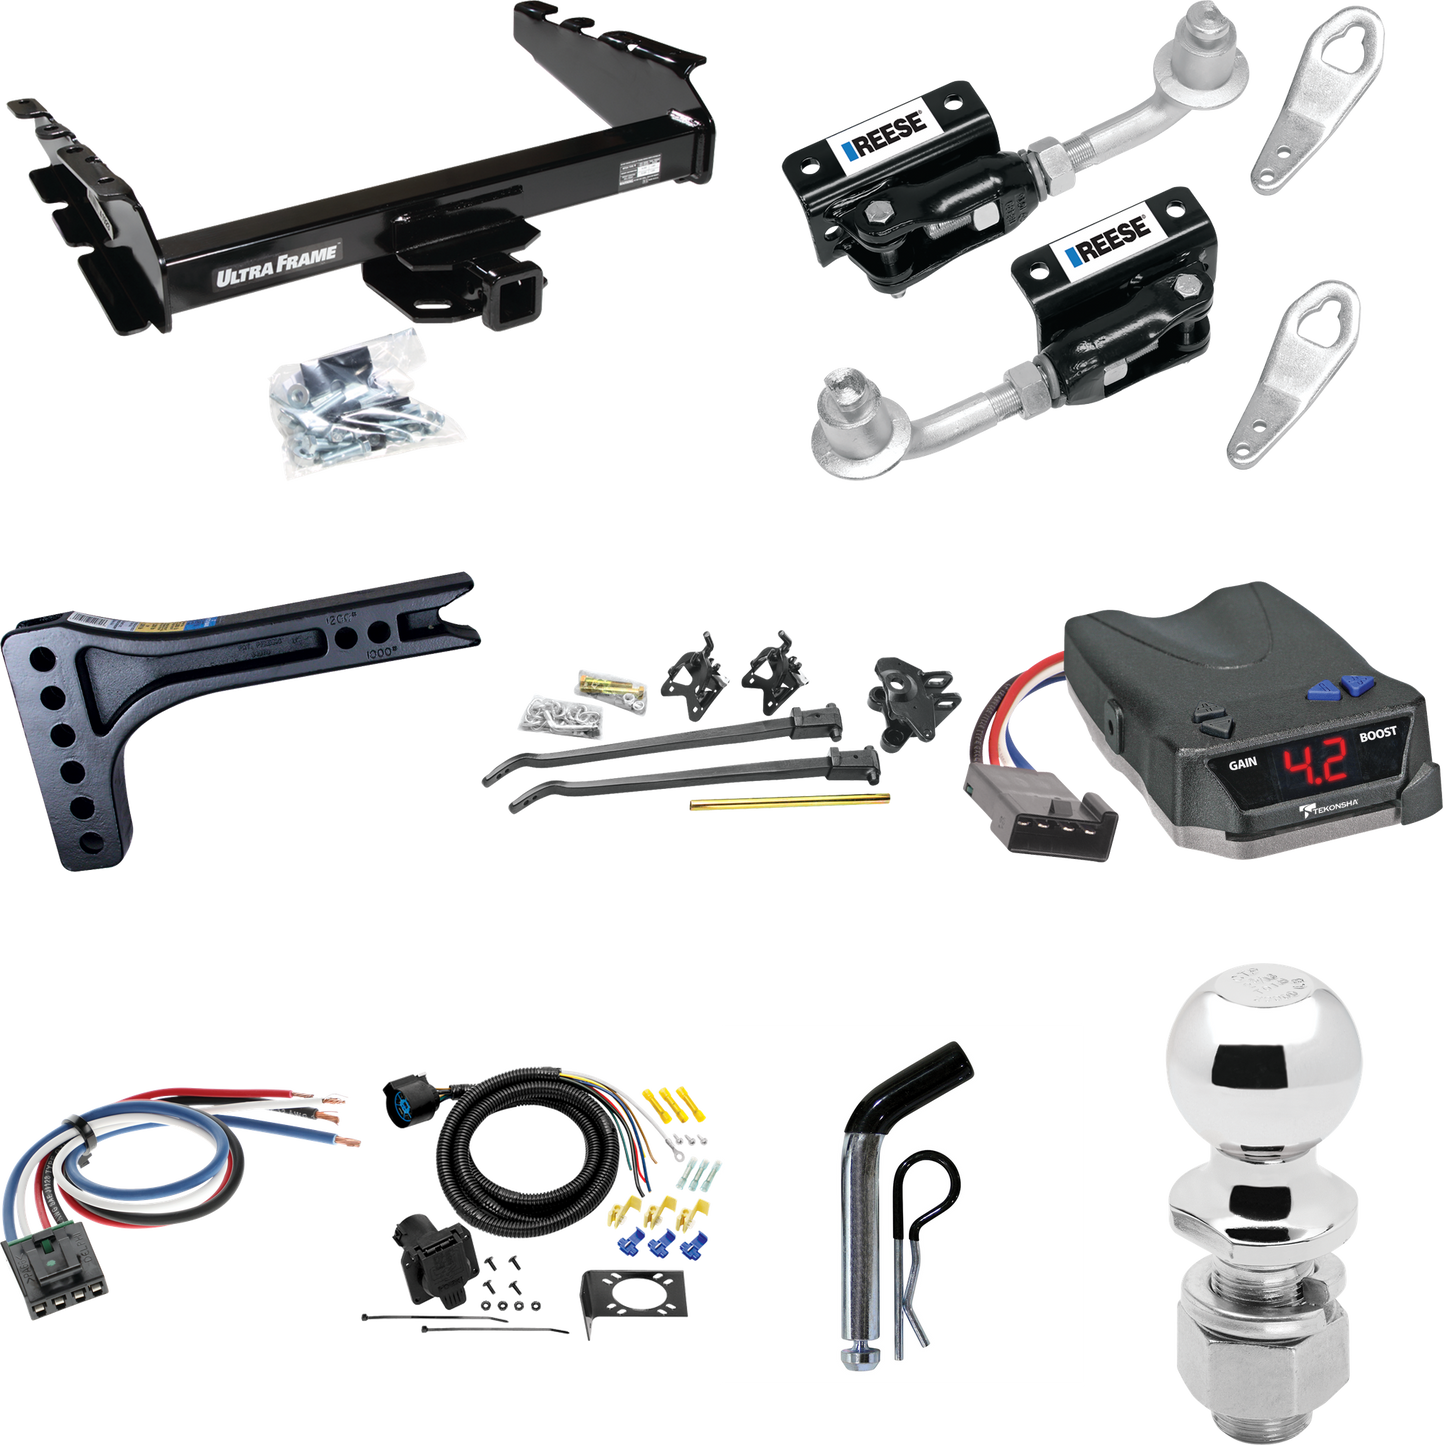 Fits 1994-1994 Dodge Ram 1500 Trailer Hitch Tow PKG w/ 15K Trunnion Bar Weight Distribution Hitch + Pin/Clip + Dual Cam Sway Control + 2-5/16" Ball + Tekonsha BRAKE-EVN Brake Control + Generic BC Wiring Adapter + 7-Way RV Wiring By Draw-Tite